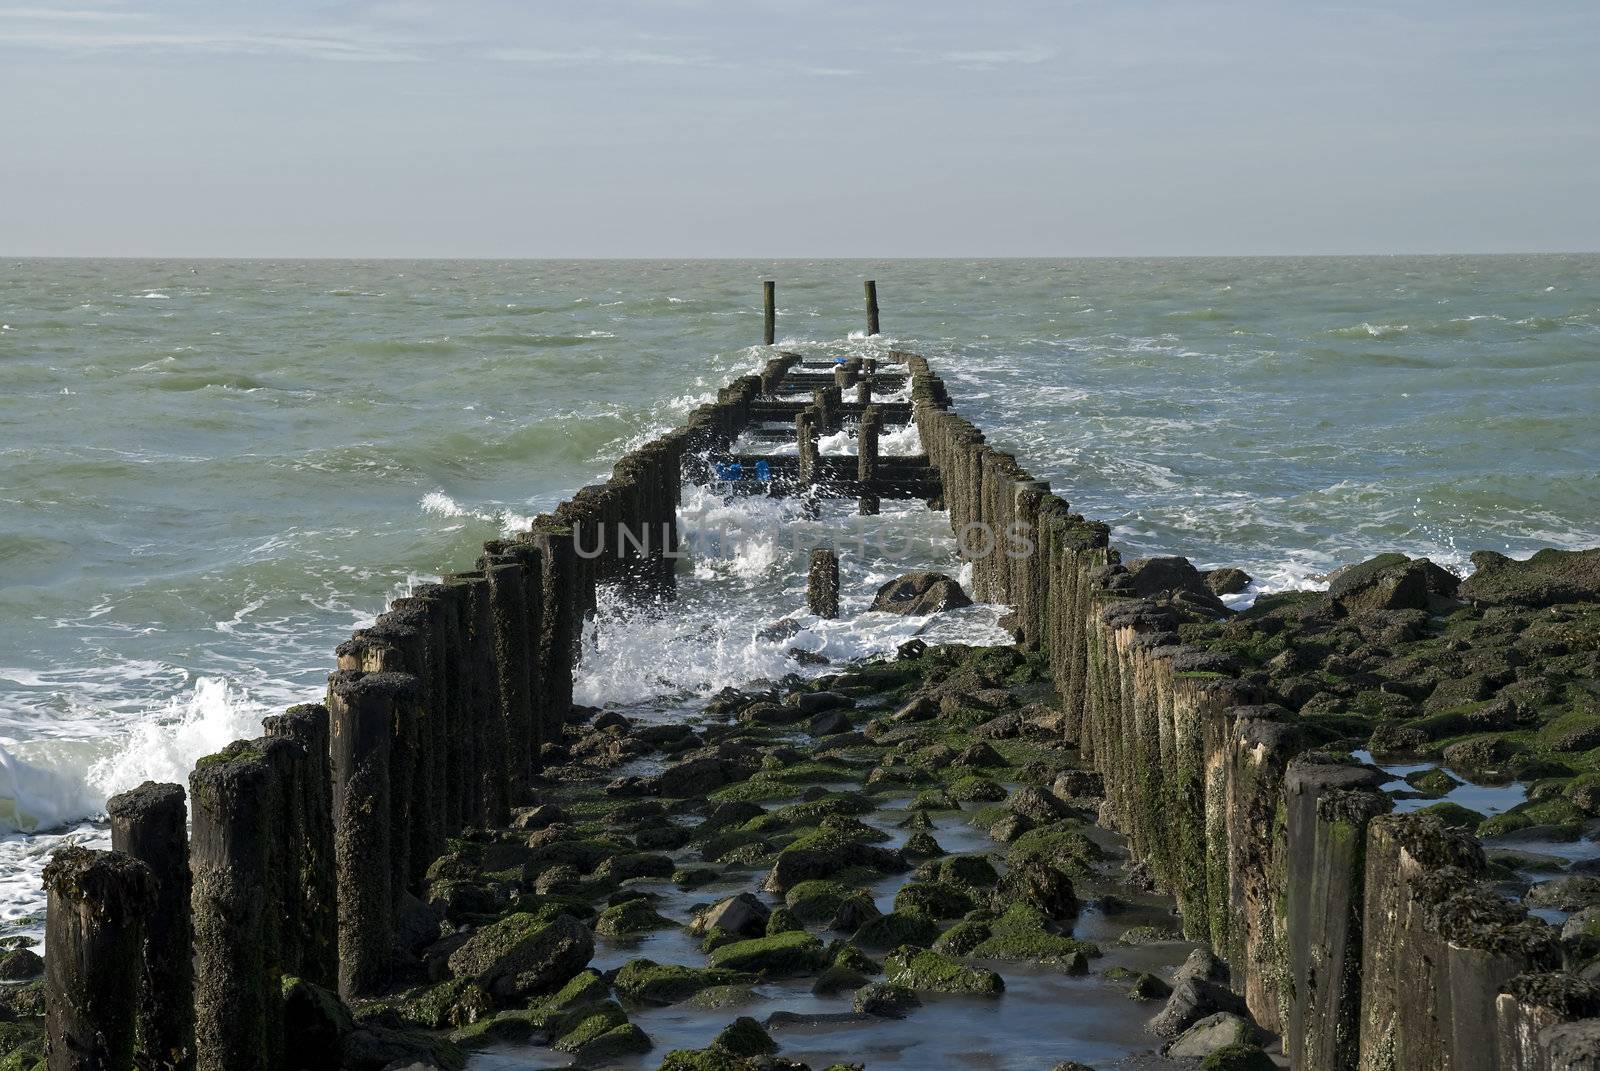 North Sea beach with breakwater,Netherlands by Gertje